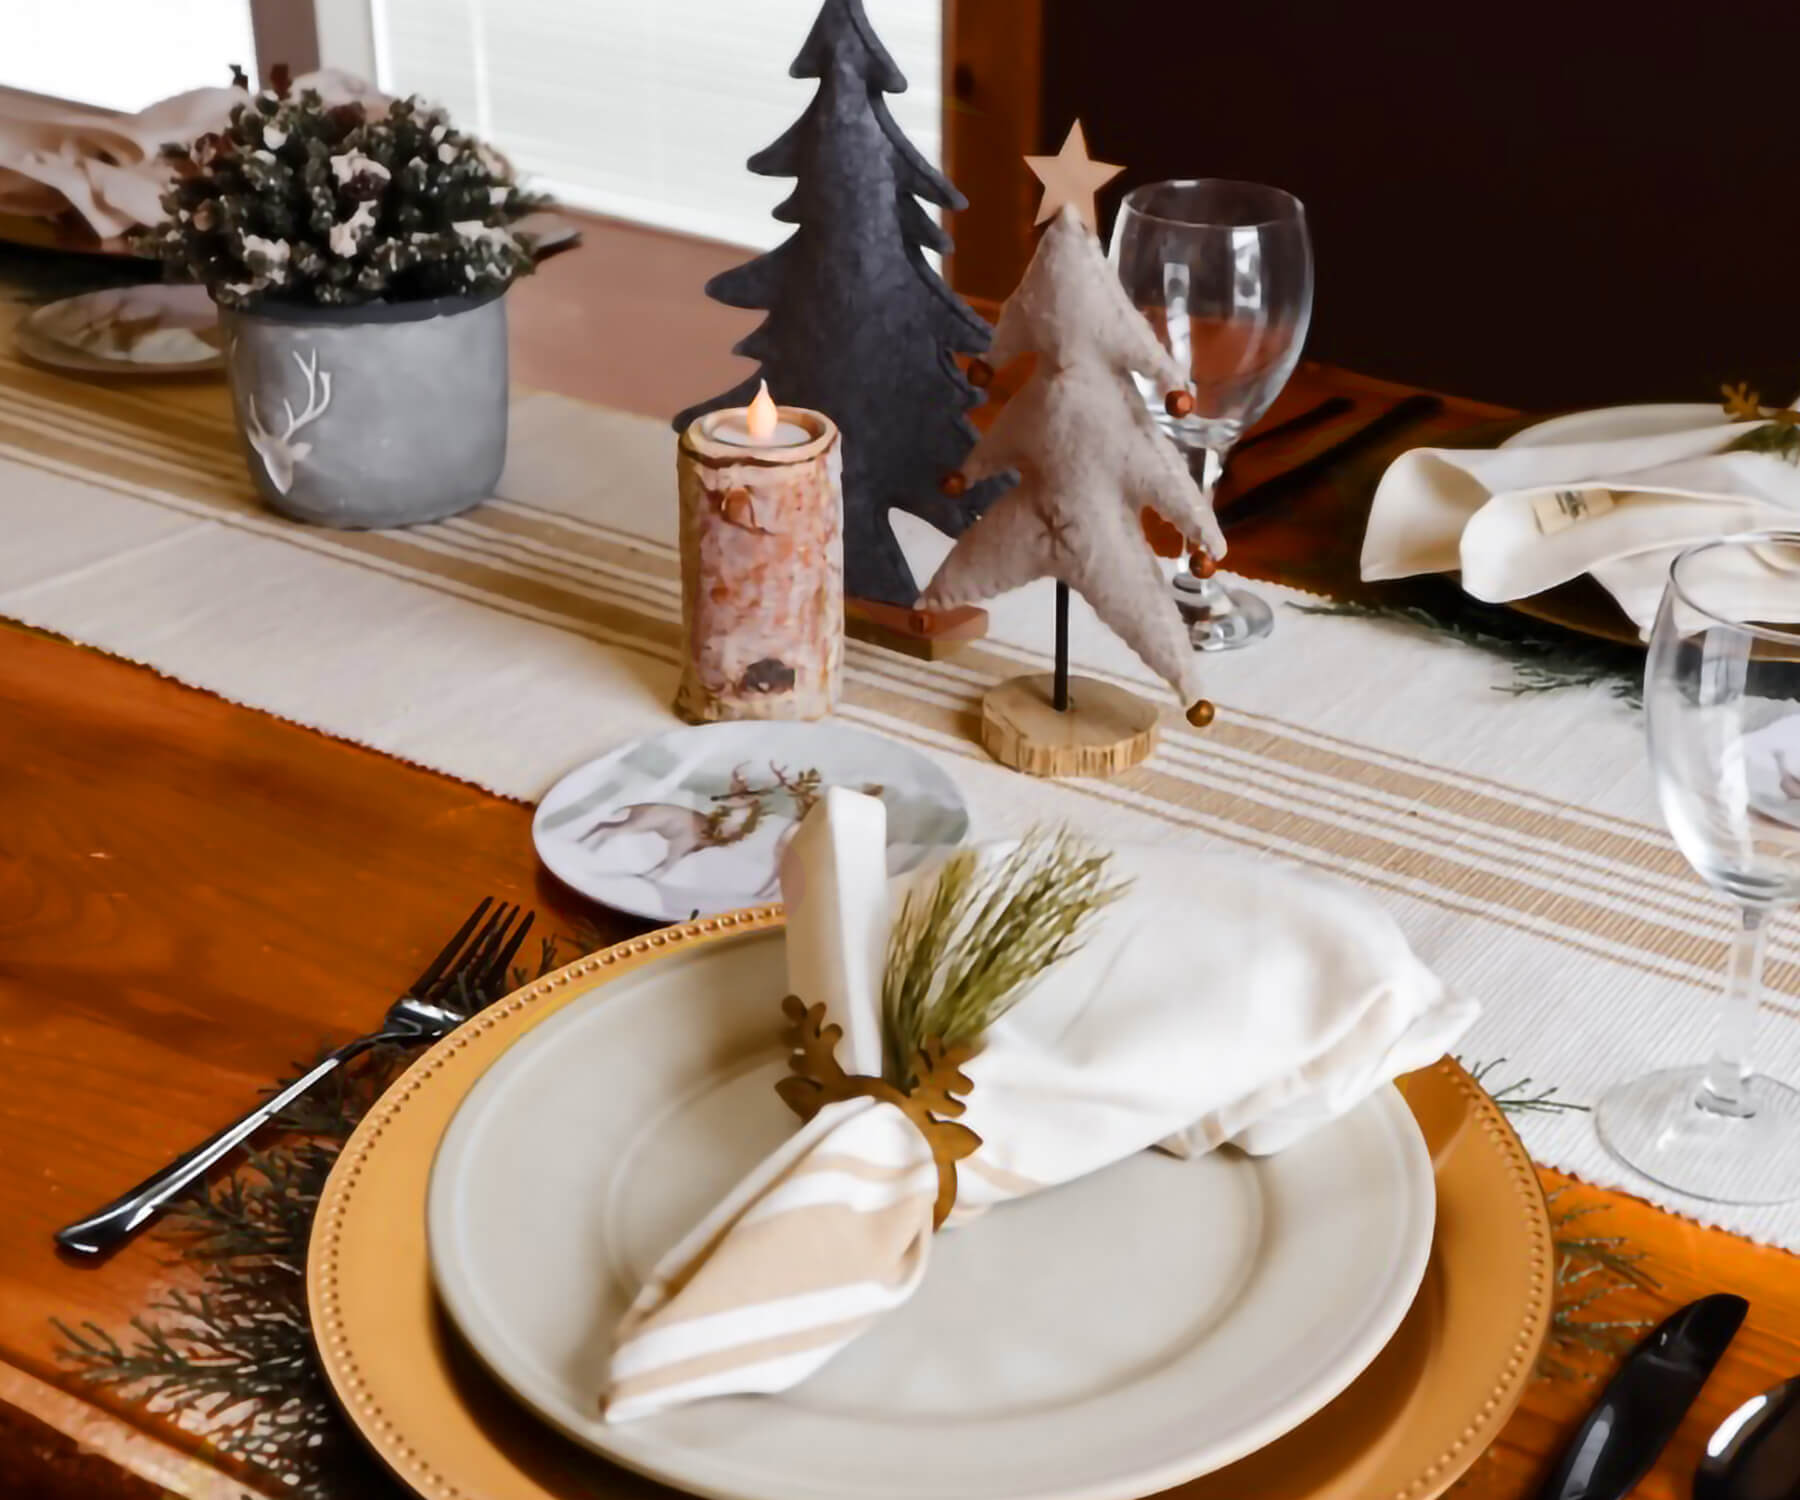 White cotton napkins with Beige and cream striped - Farmhouse napkins  pattern are folded with grass & placed on the plate on the table.